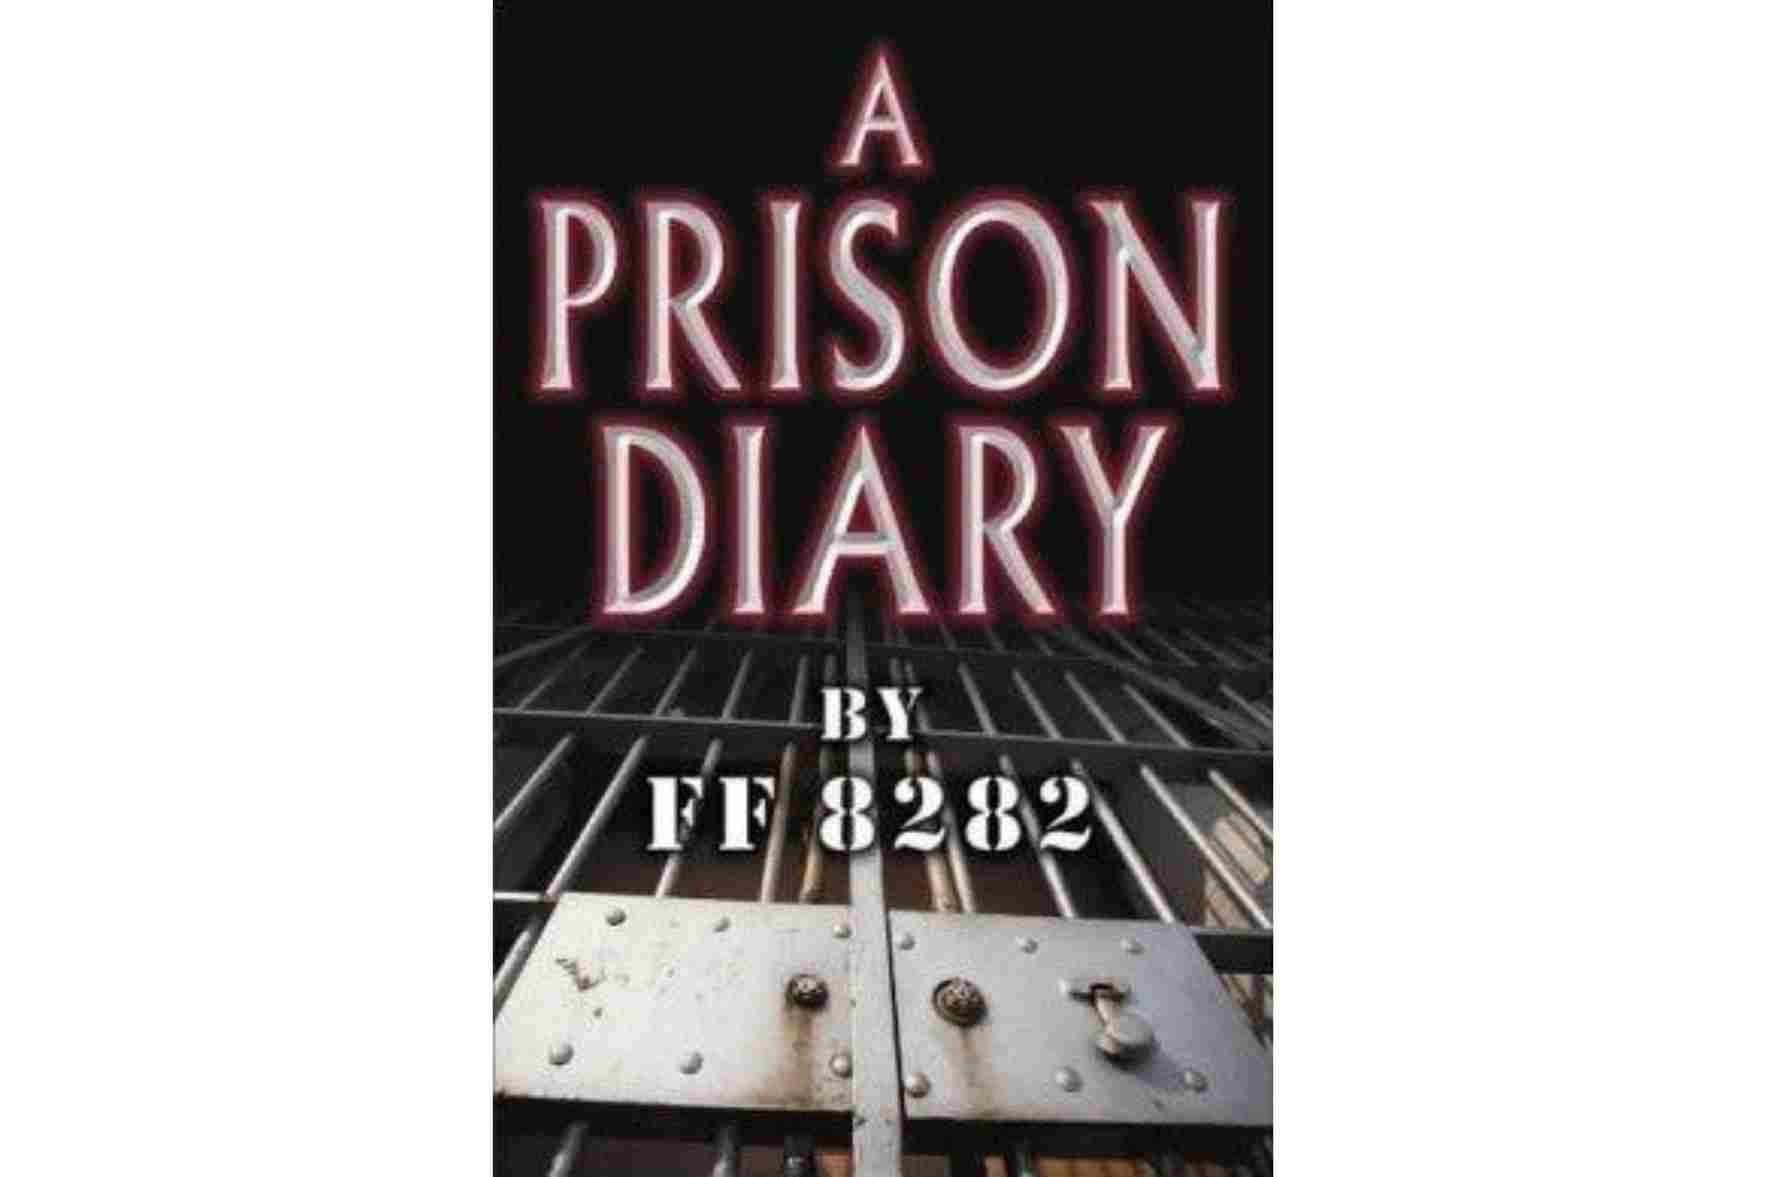 Book cover of A Prison Diary by Jeffrey Archer